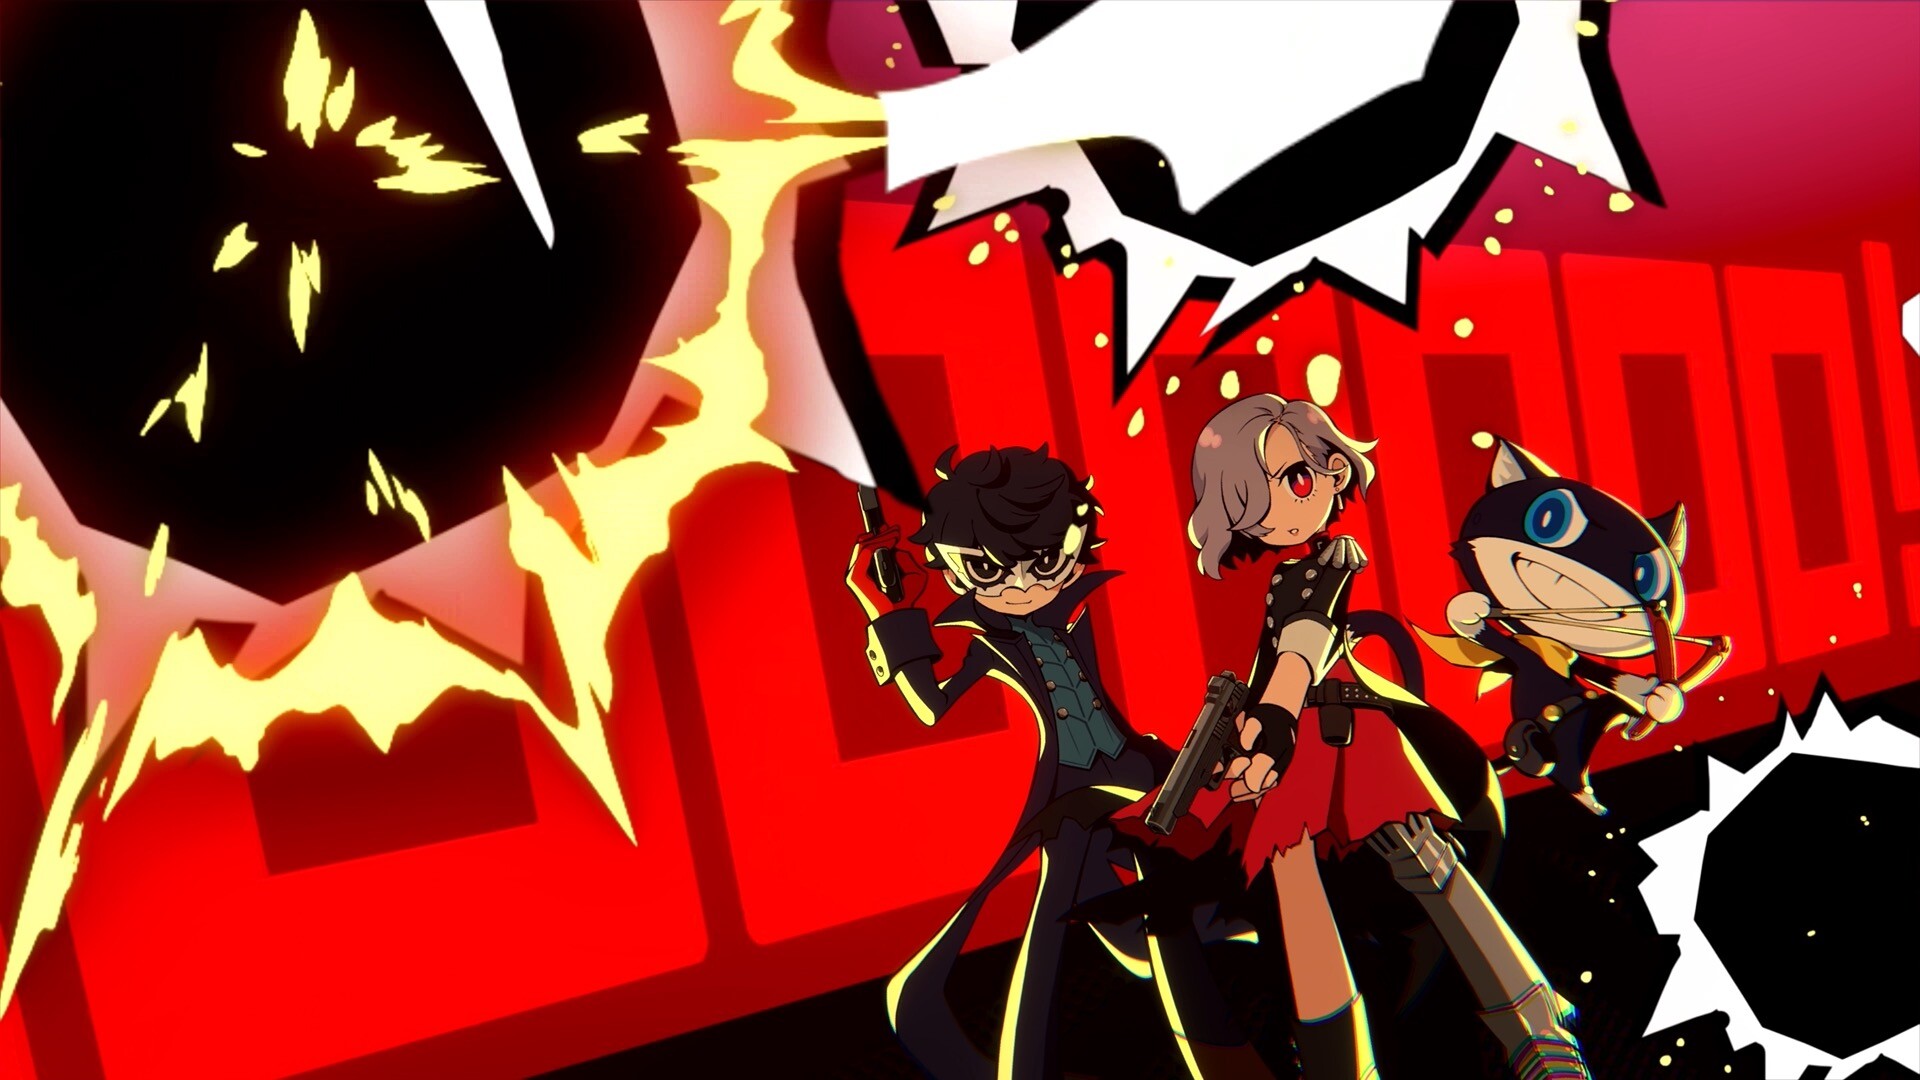 Persona 5 characters – all playable Phantom Thieves